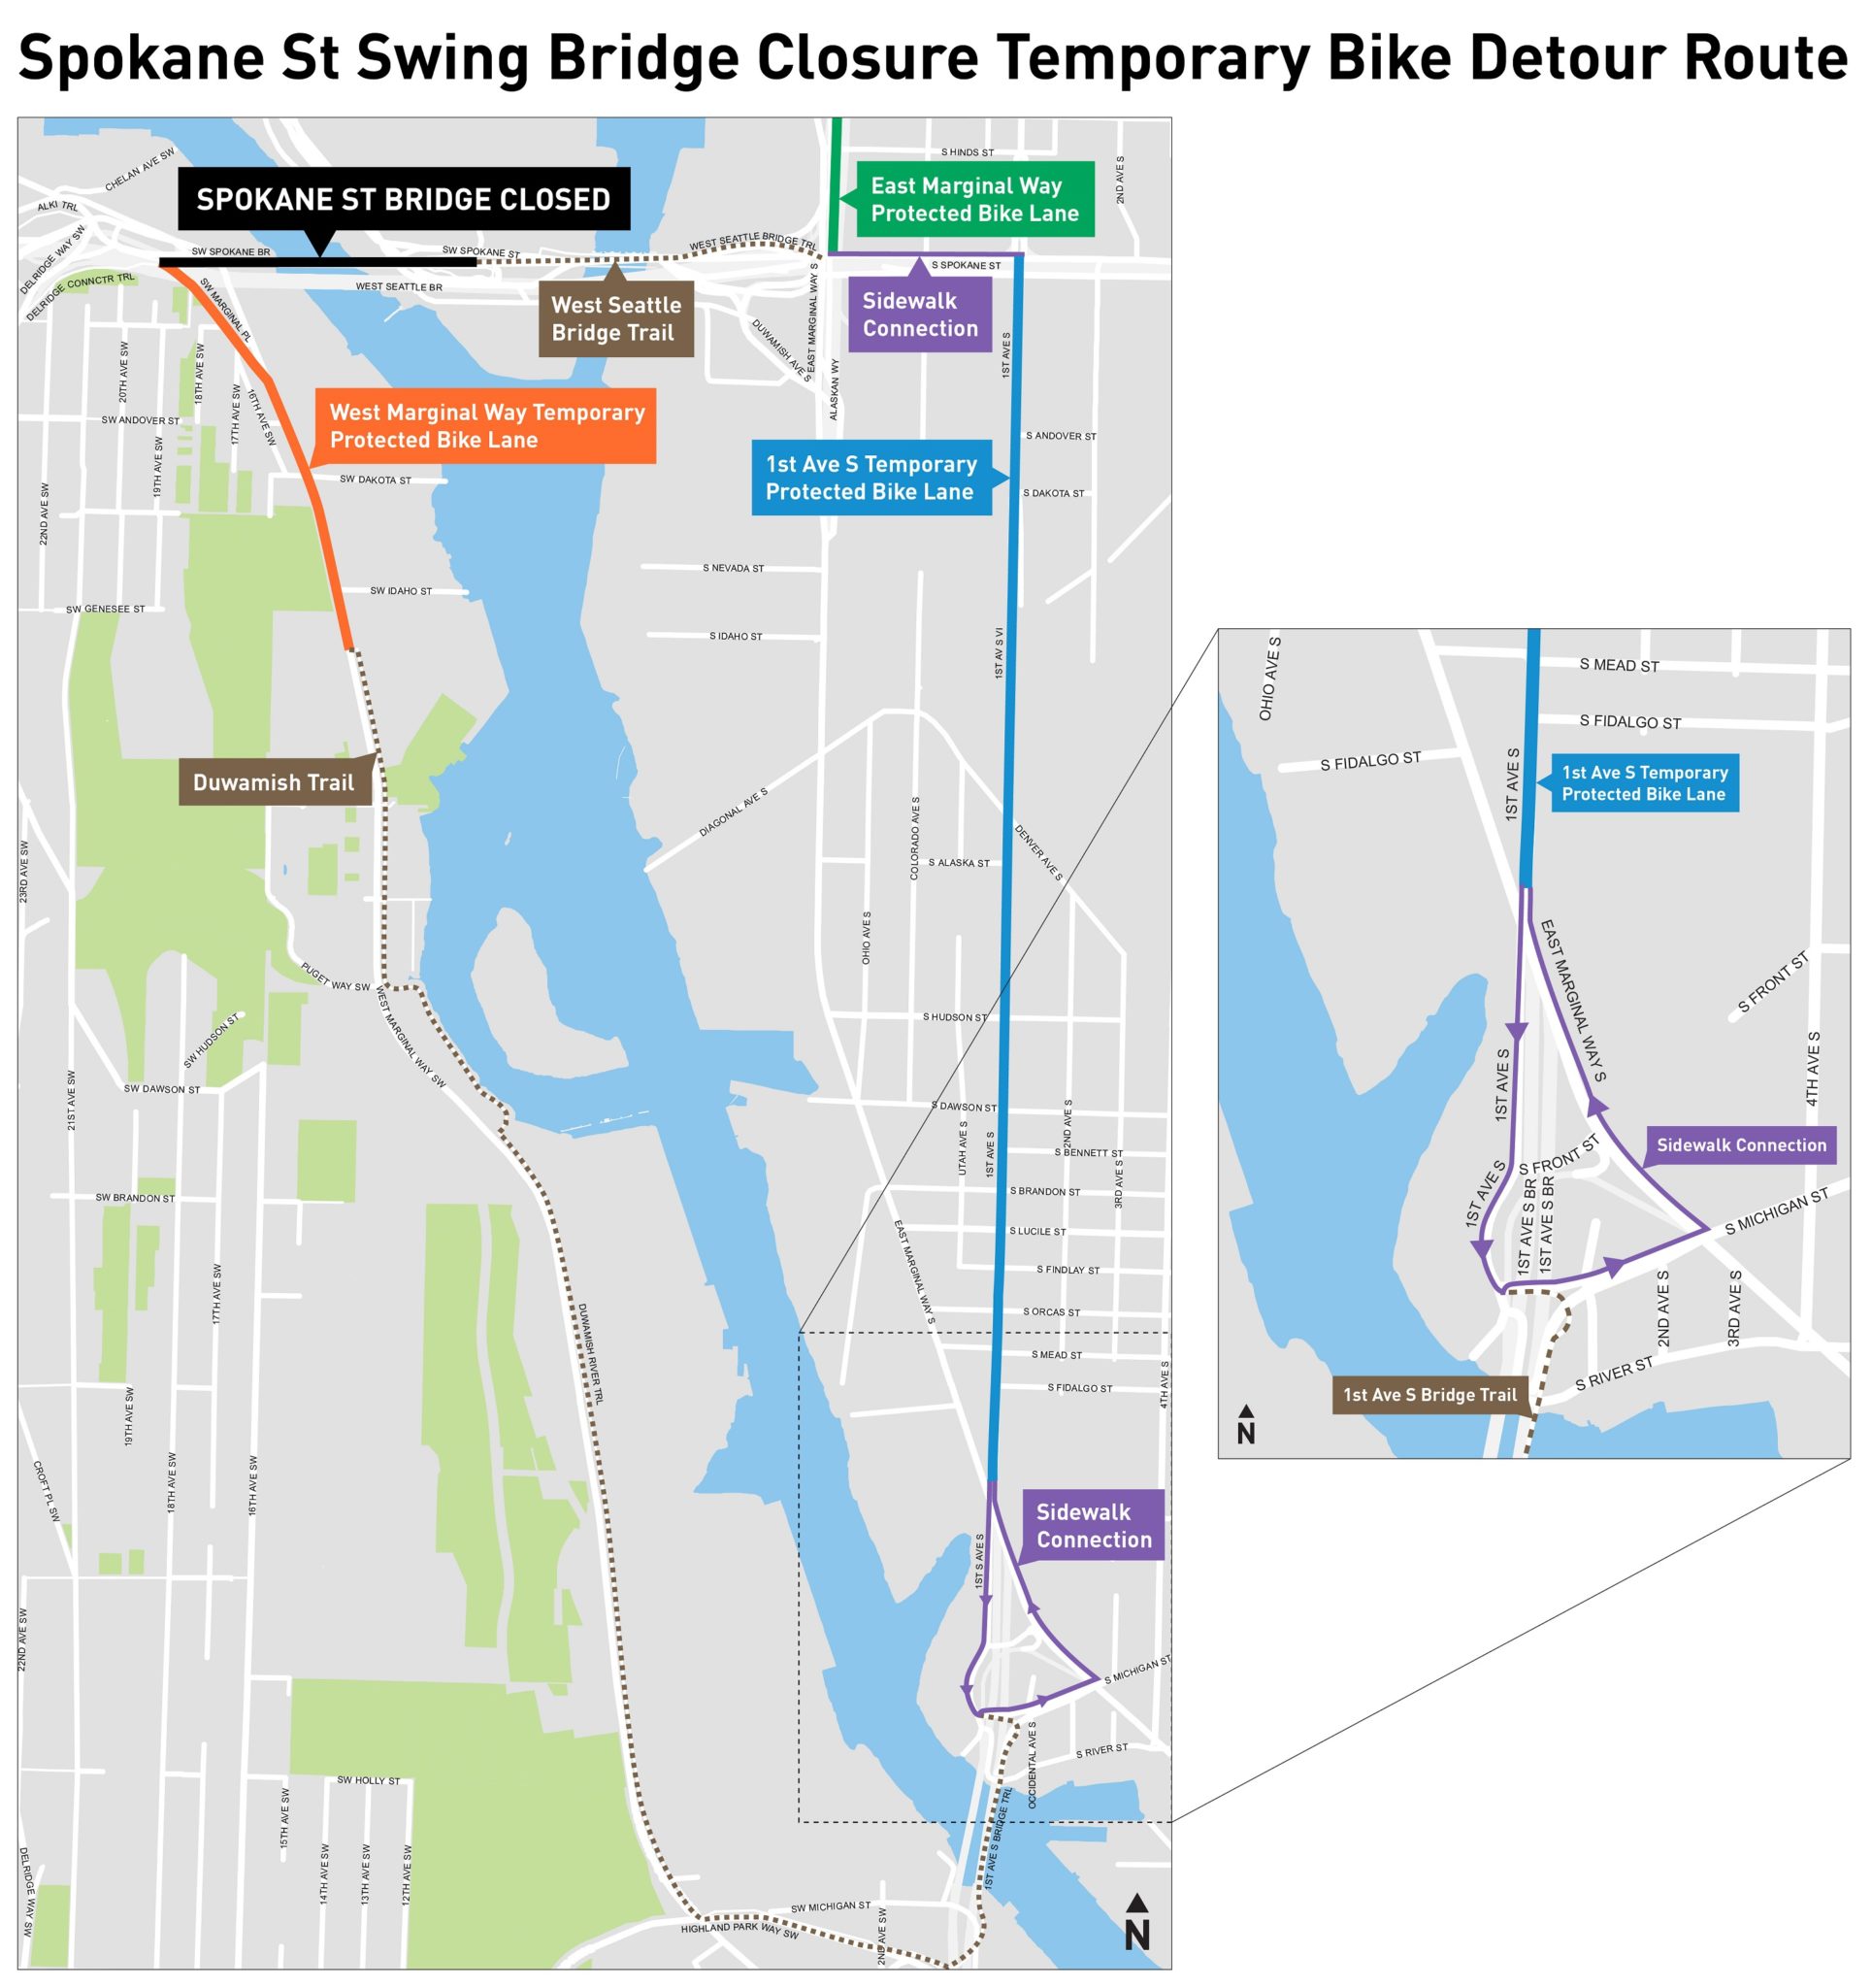 Map of the planned enhanced detour route, including new temporary protected bike lanes to be installed on West Marginal Way SW and 1st Ave S. The temporary detour route travels via the 1st Ave S Bridge to cross the Duwamish Waterway.